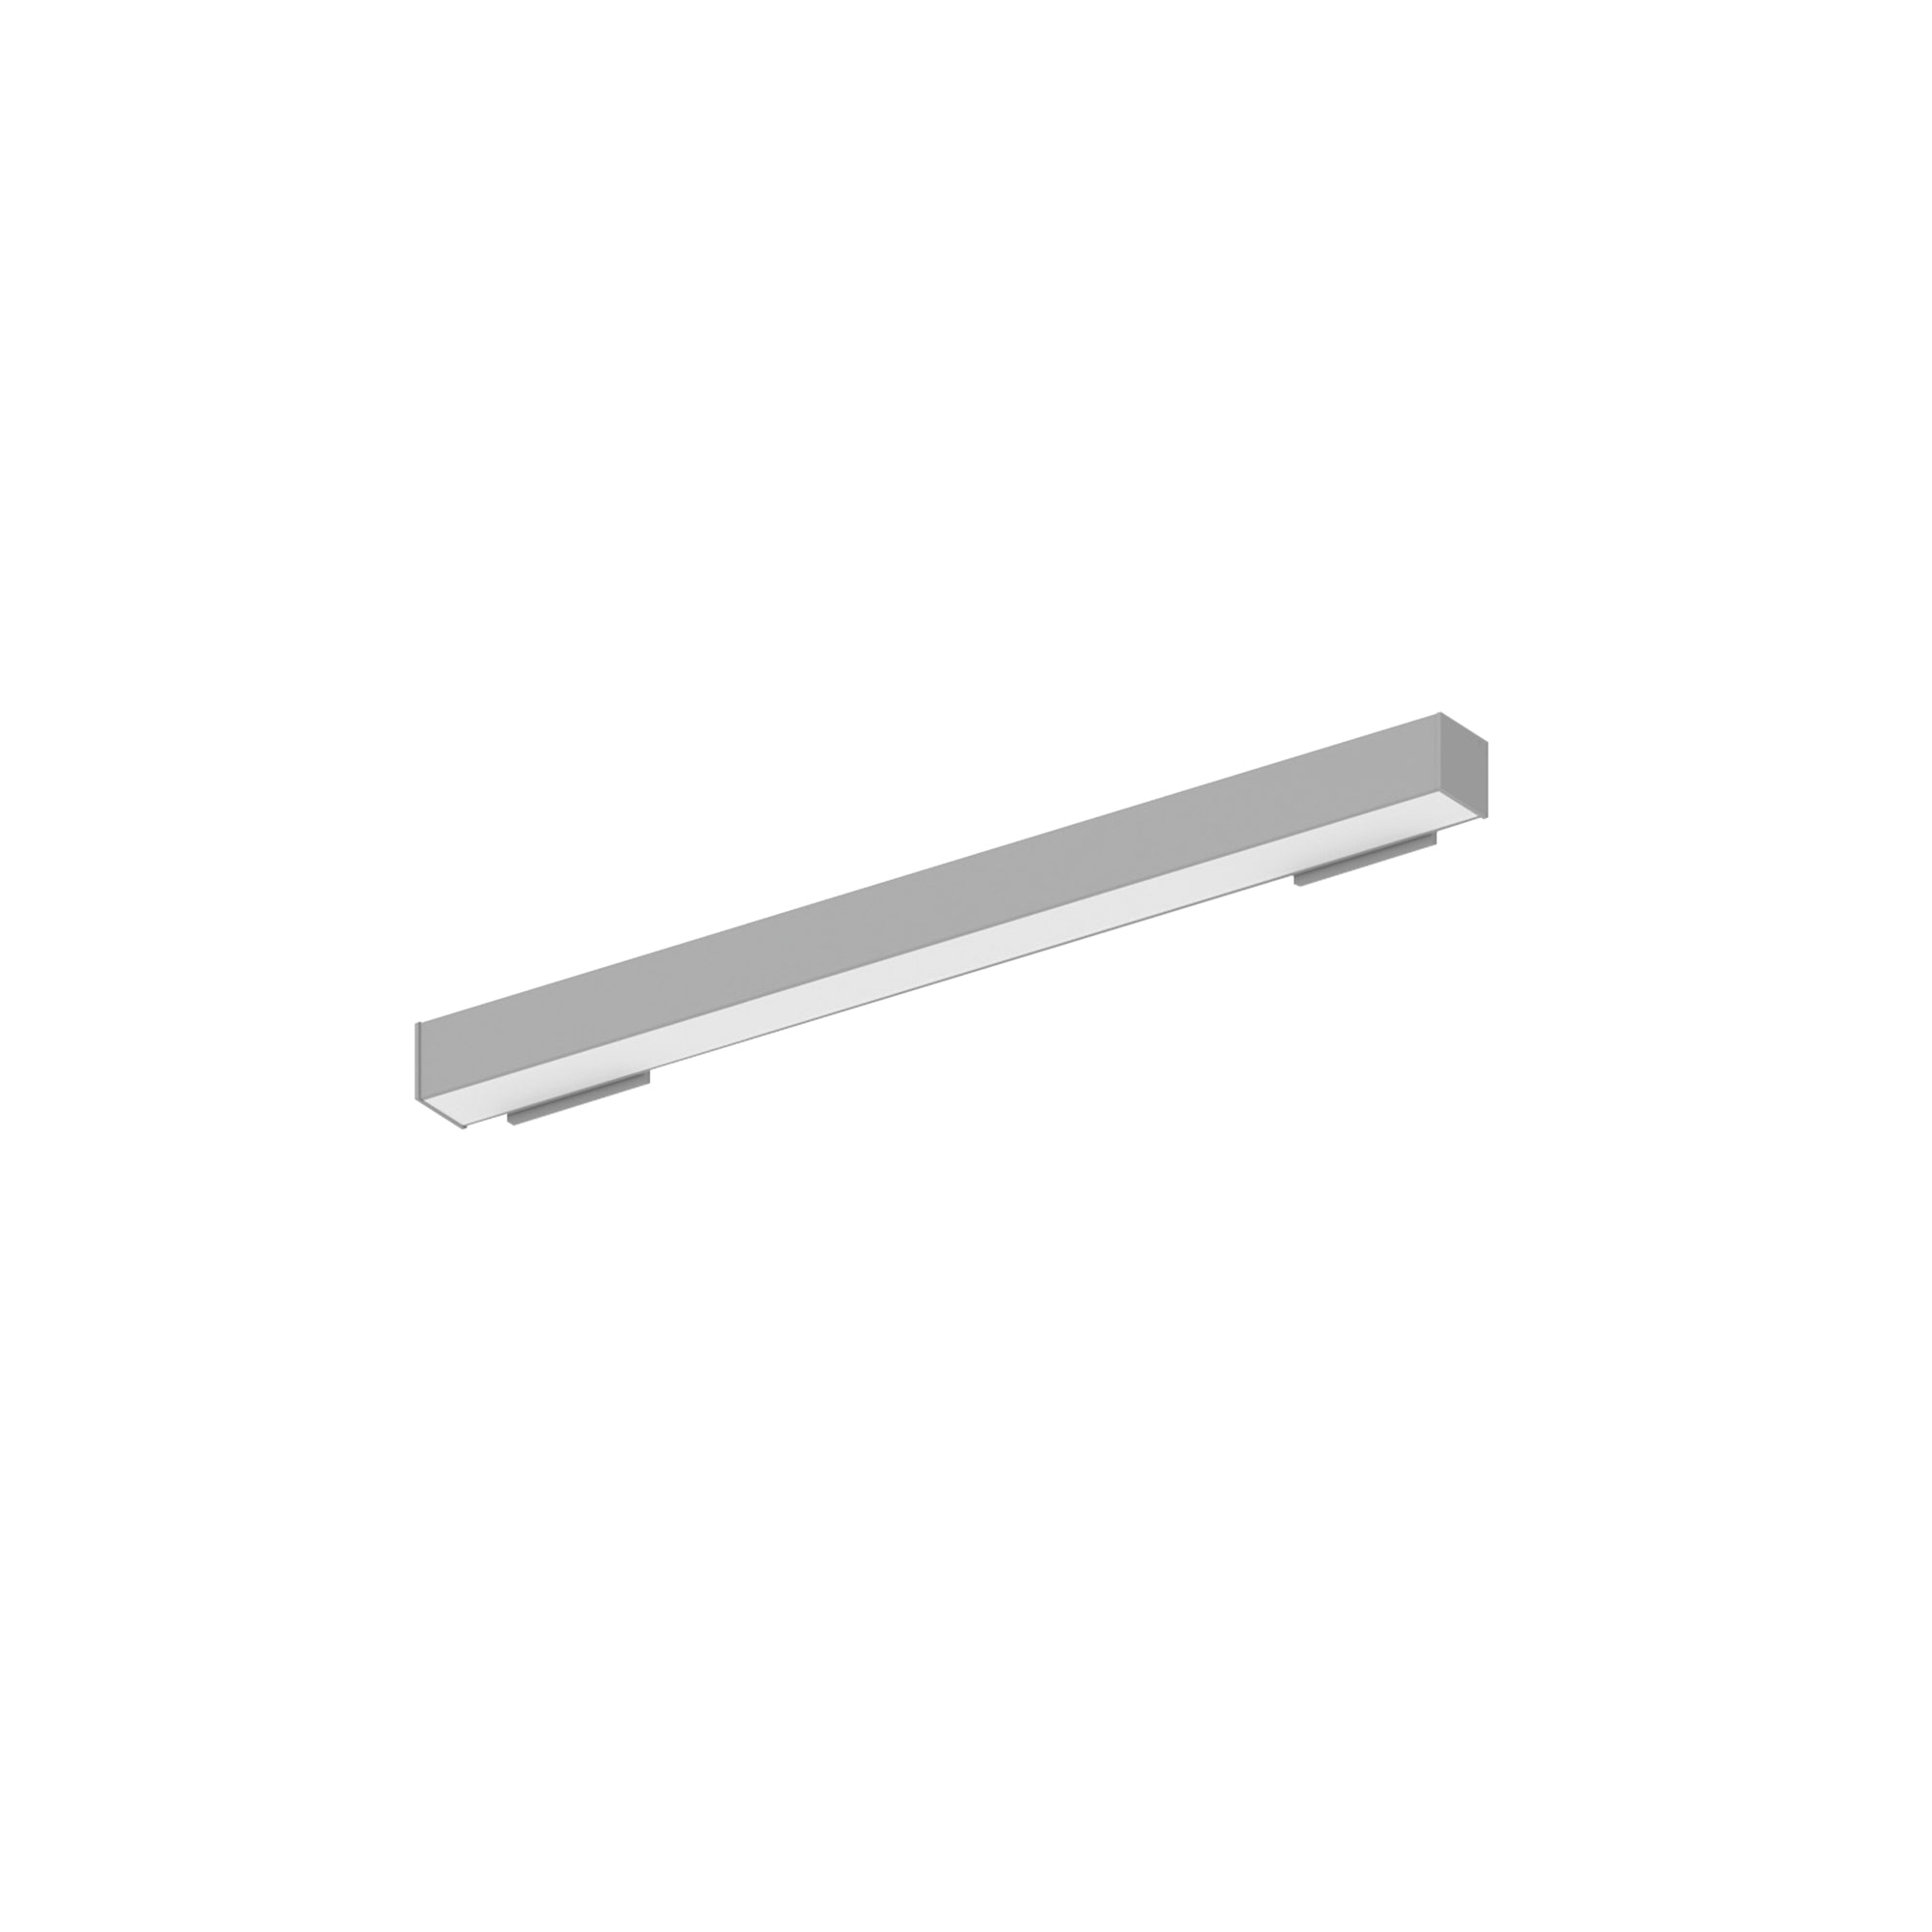 Nora Lighting NWLIN-21040A/L2-R2 - Linear - 2' L-Line LED Wall Mount Linear, 2100lm / 4000K, 2 Inchx4 Inch Left Plate & 2 Inchx4 Inch Right Plate, Aluminum Finish